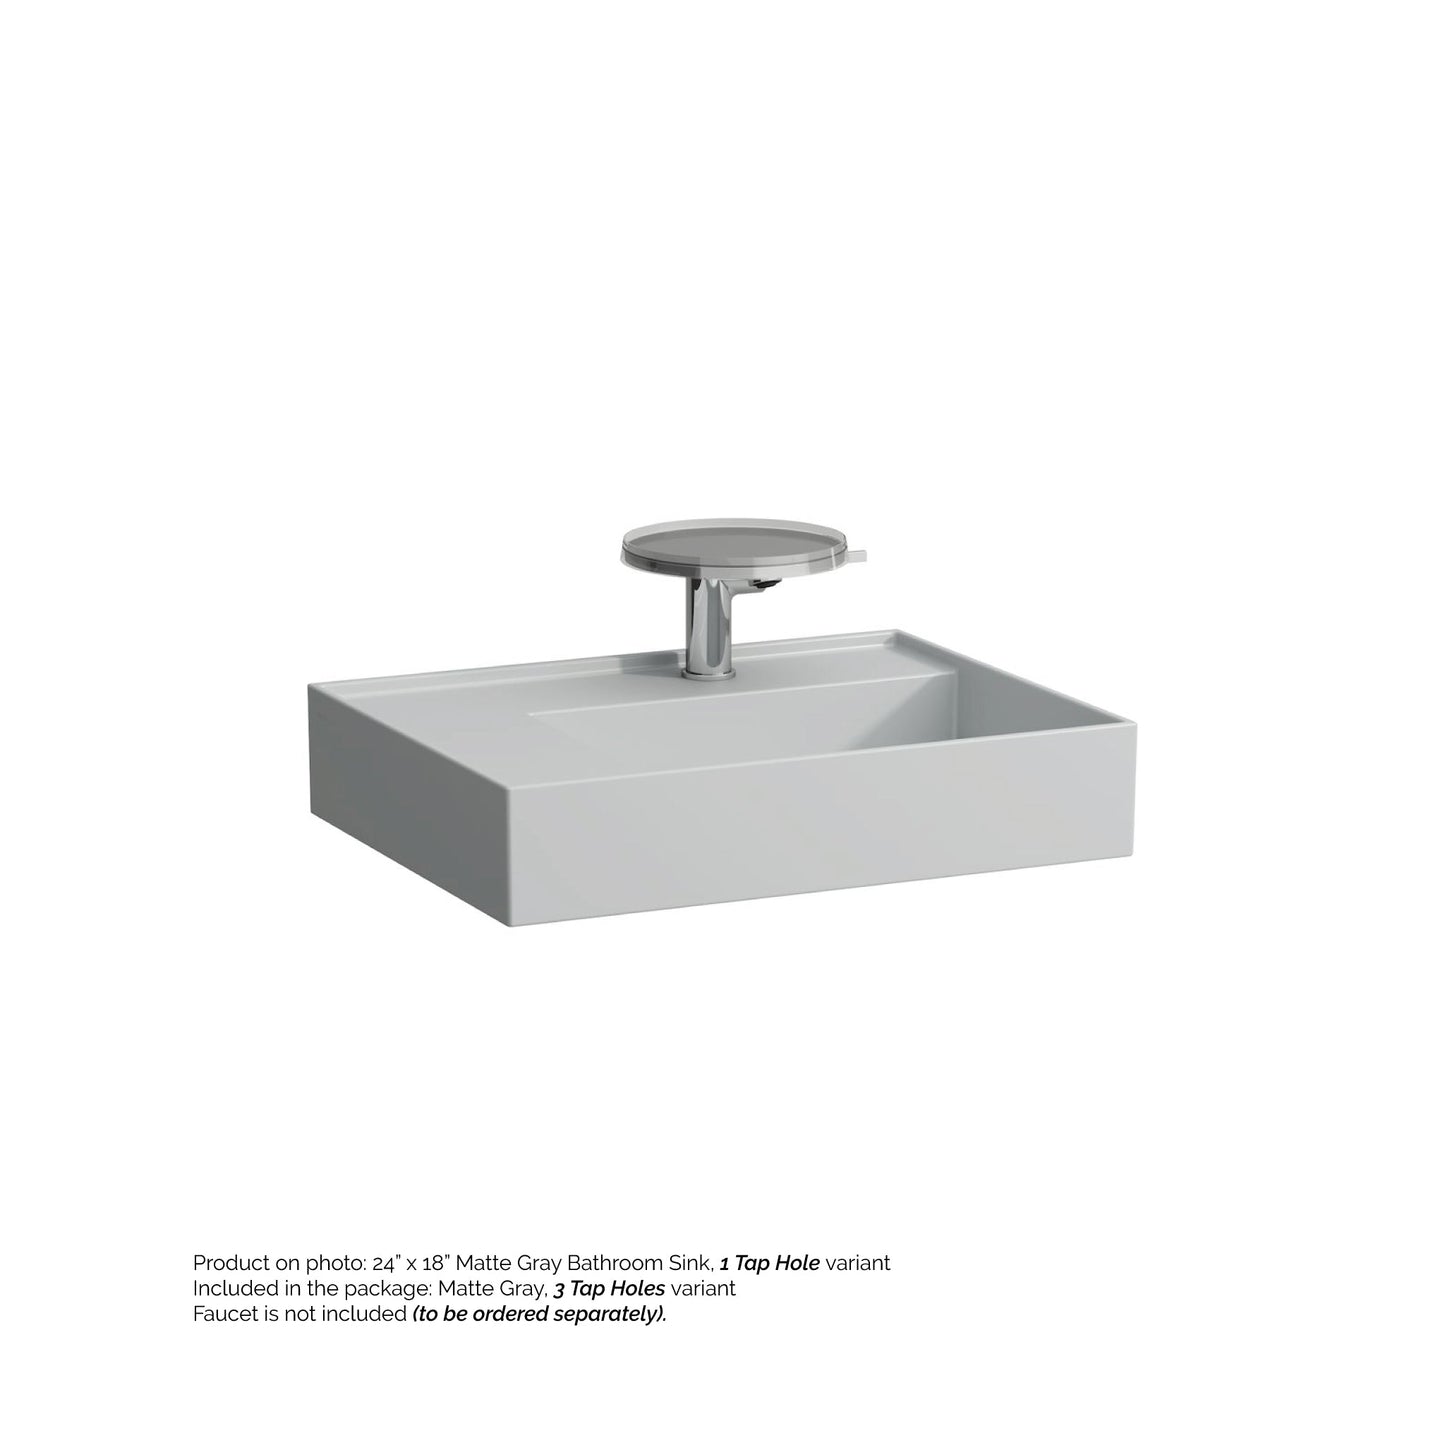 Laufen Kartell 24" x 18" Matte Gray Wall-Mounted Shelf-Left Bathroom Sink With 3 Faucet Holes